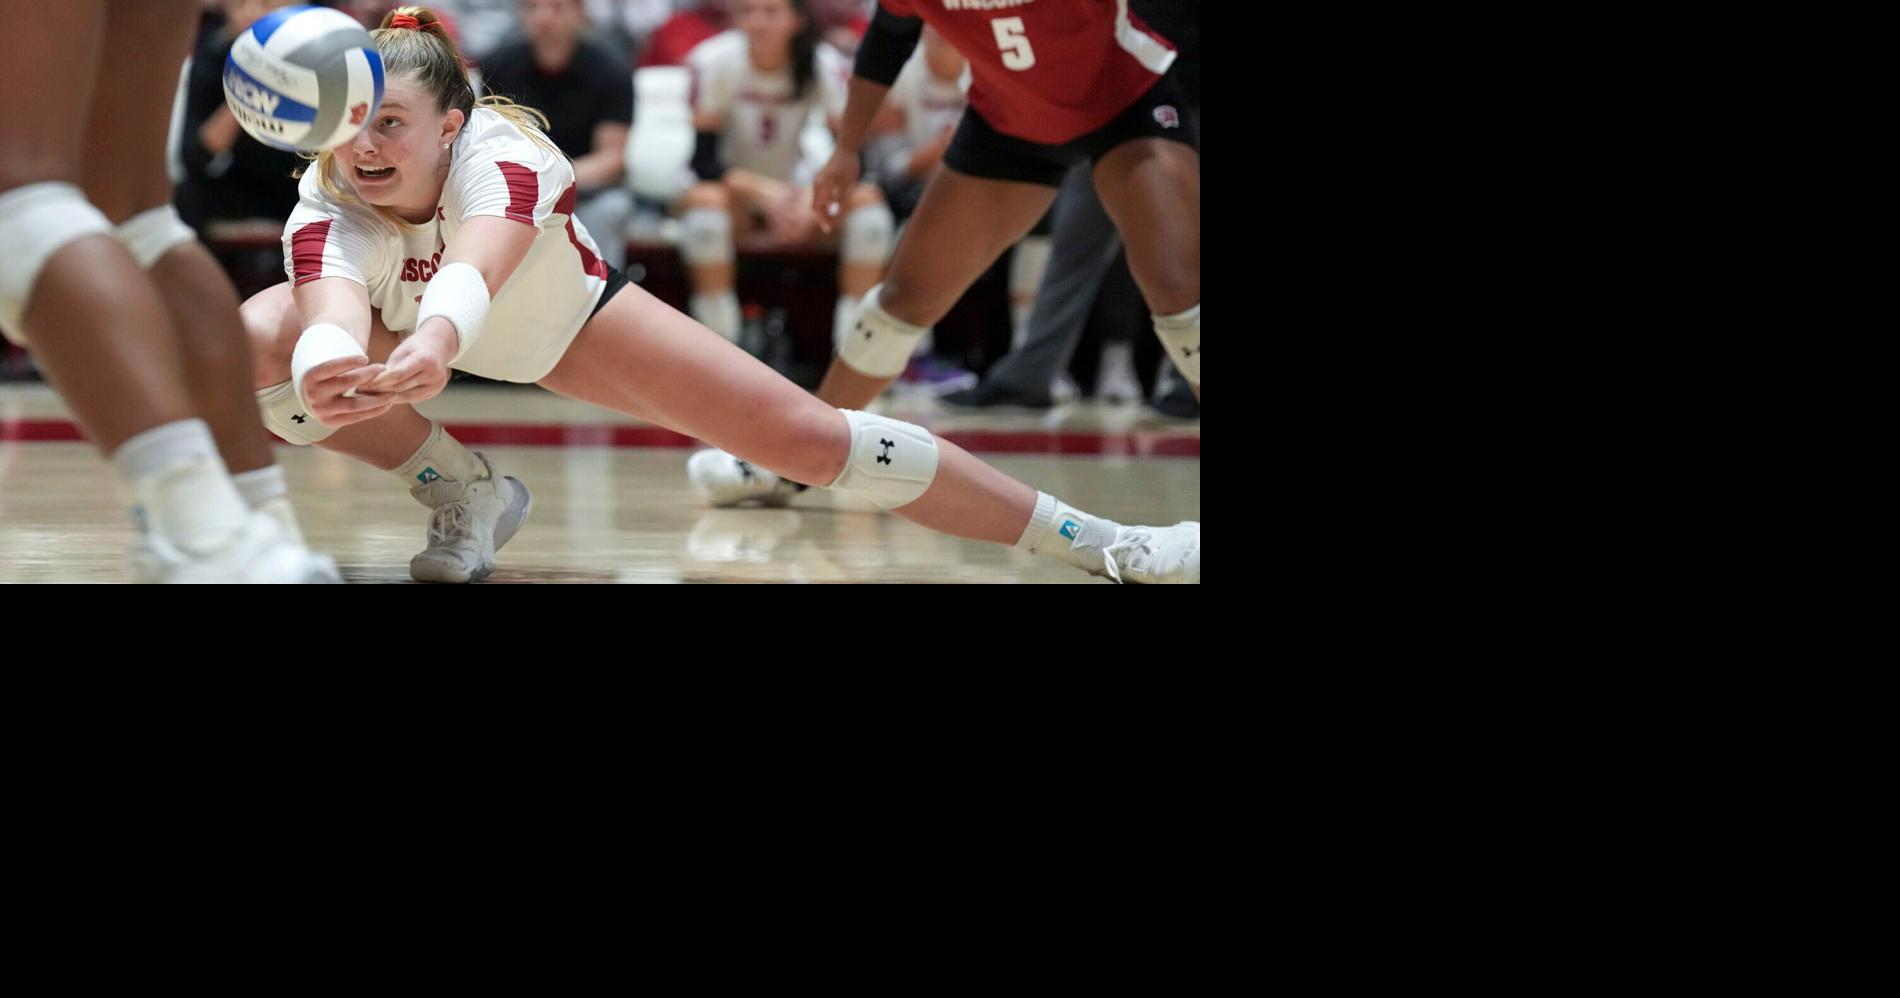 Sarah Franklin honored as Wisconsin volleyball climbs the rankings